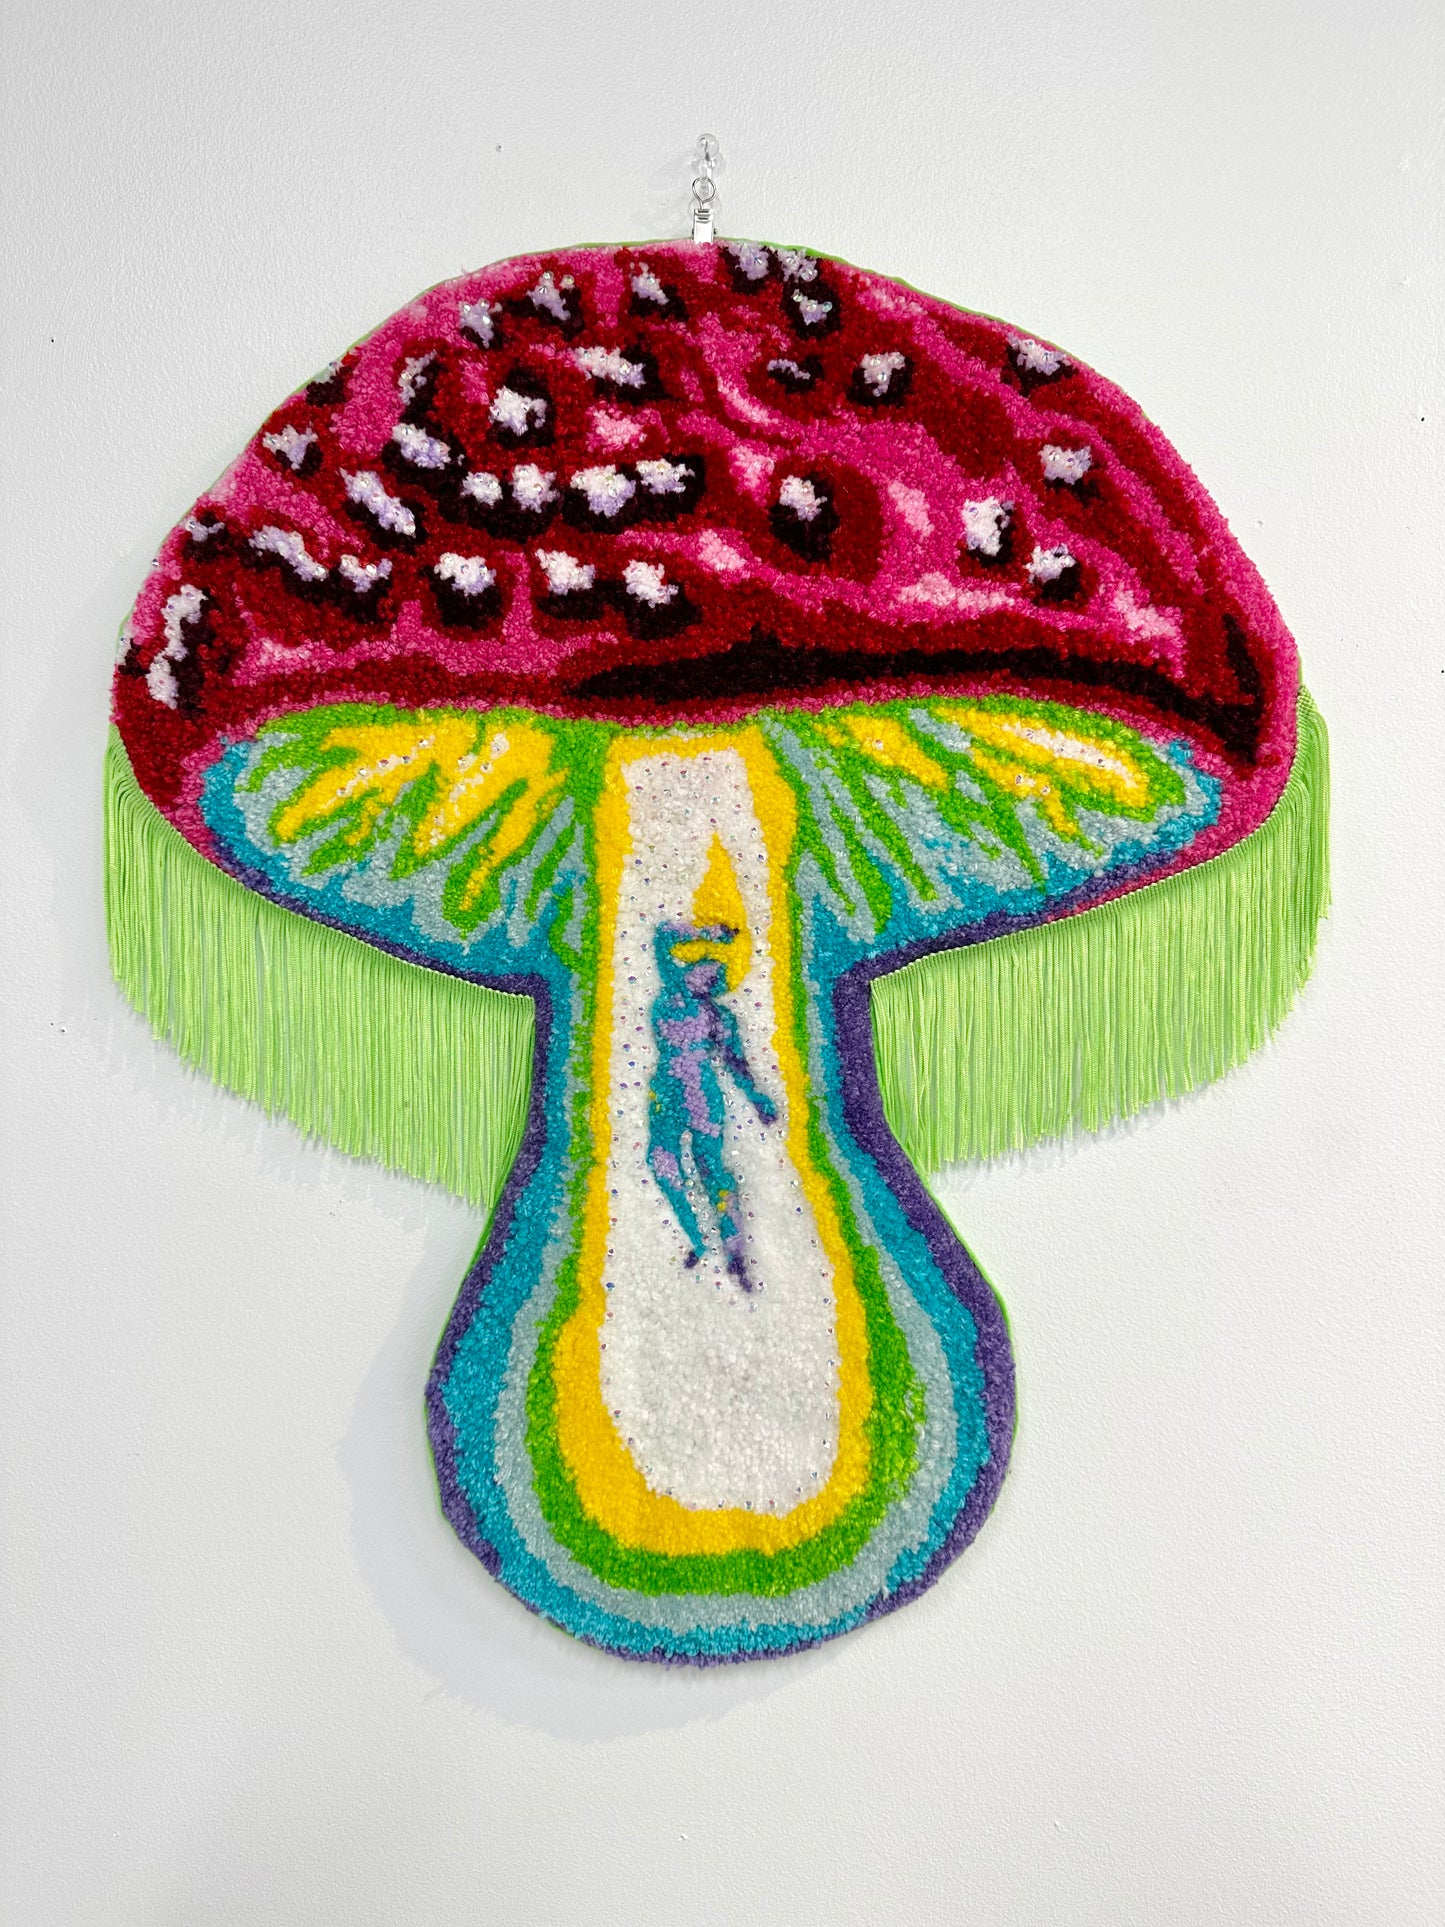 HandMade By The Artist: Bedazzled UFO Amanita Abduction, by Chrissy Crater